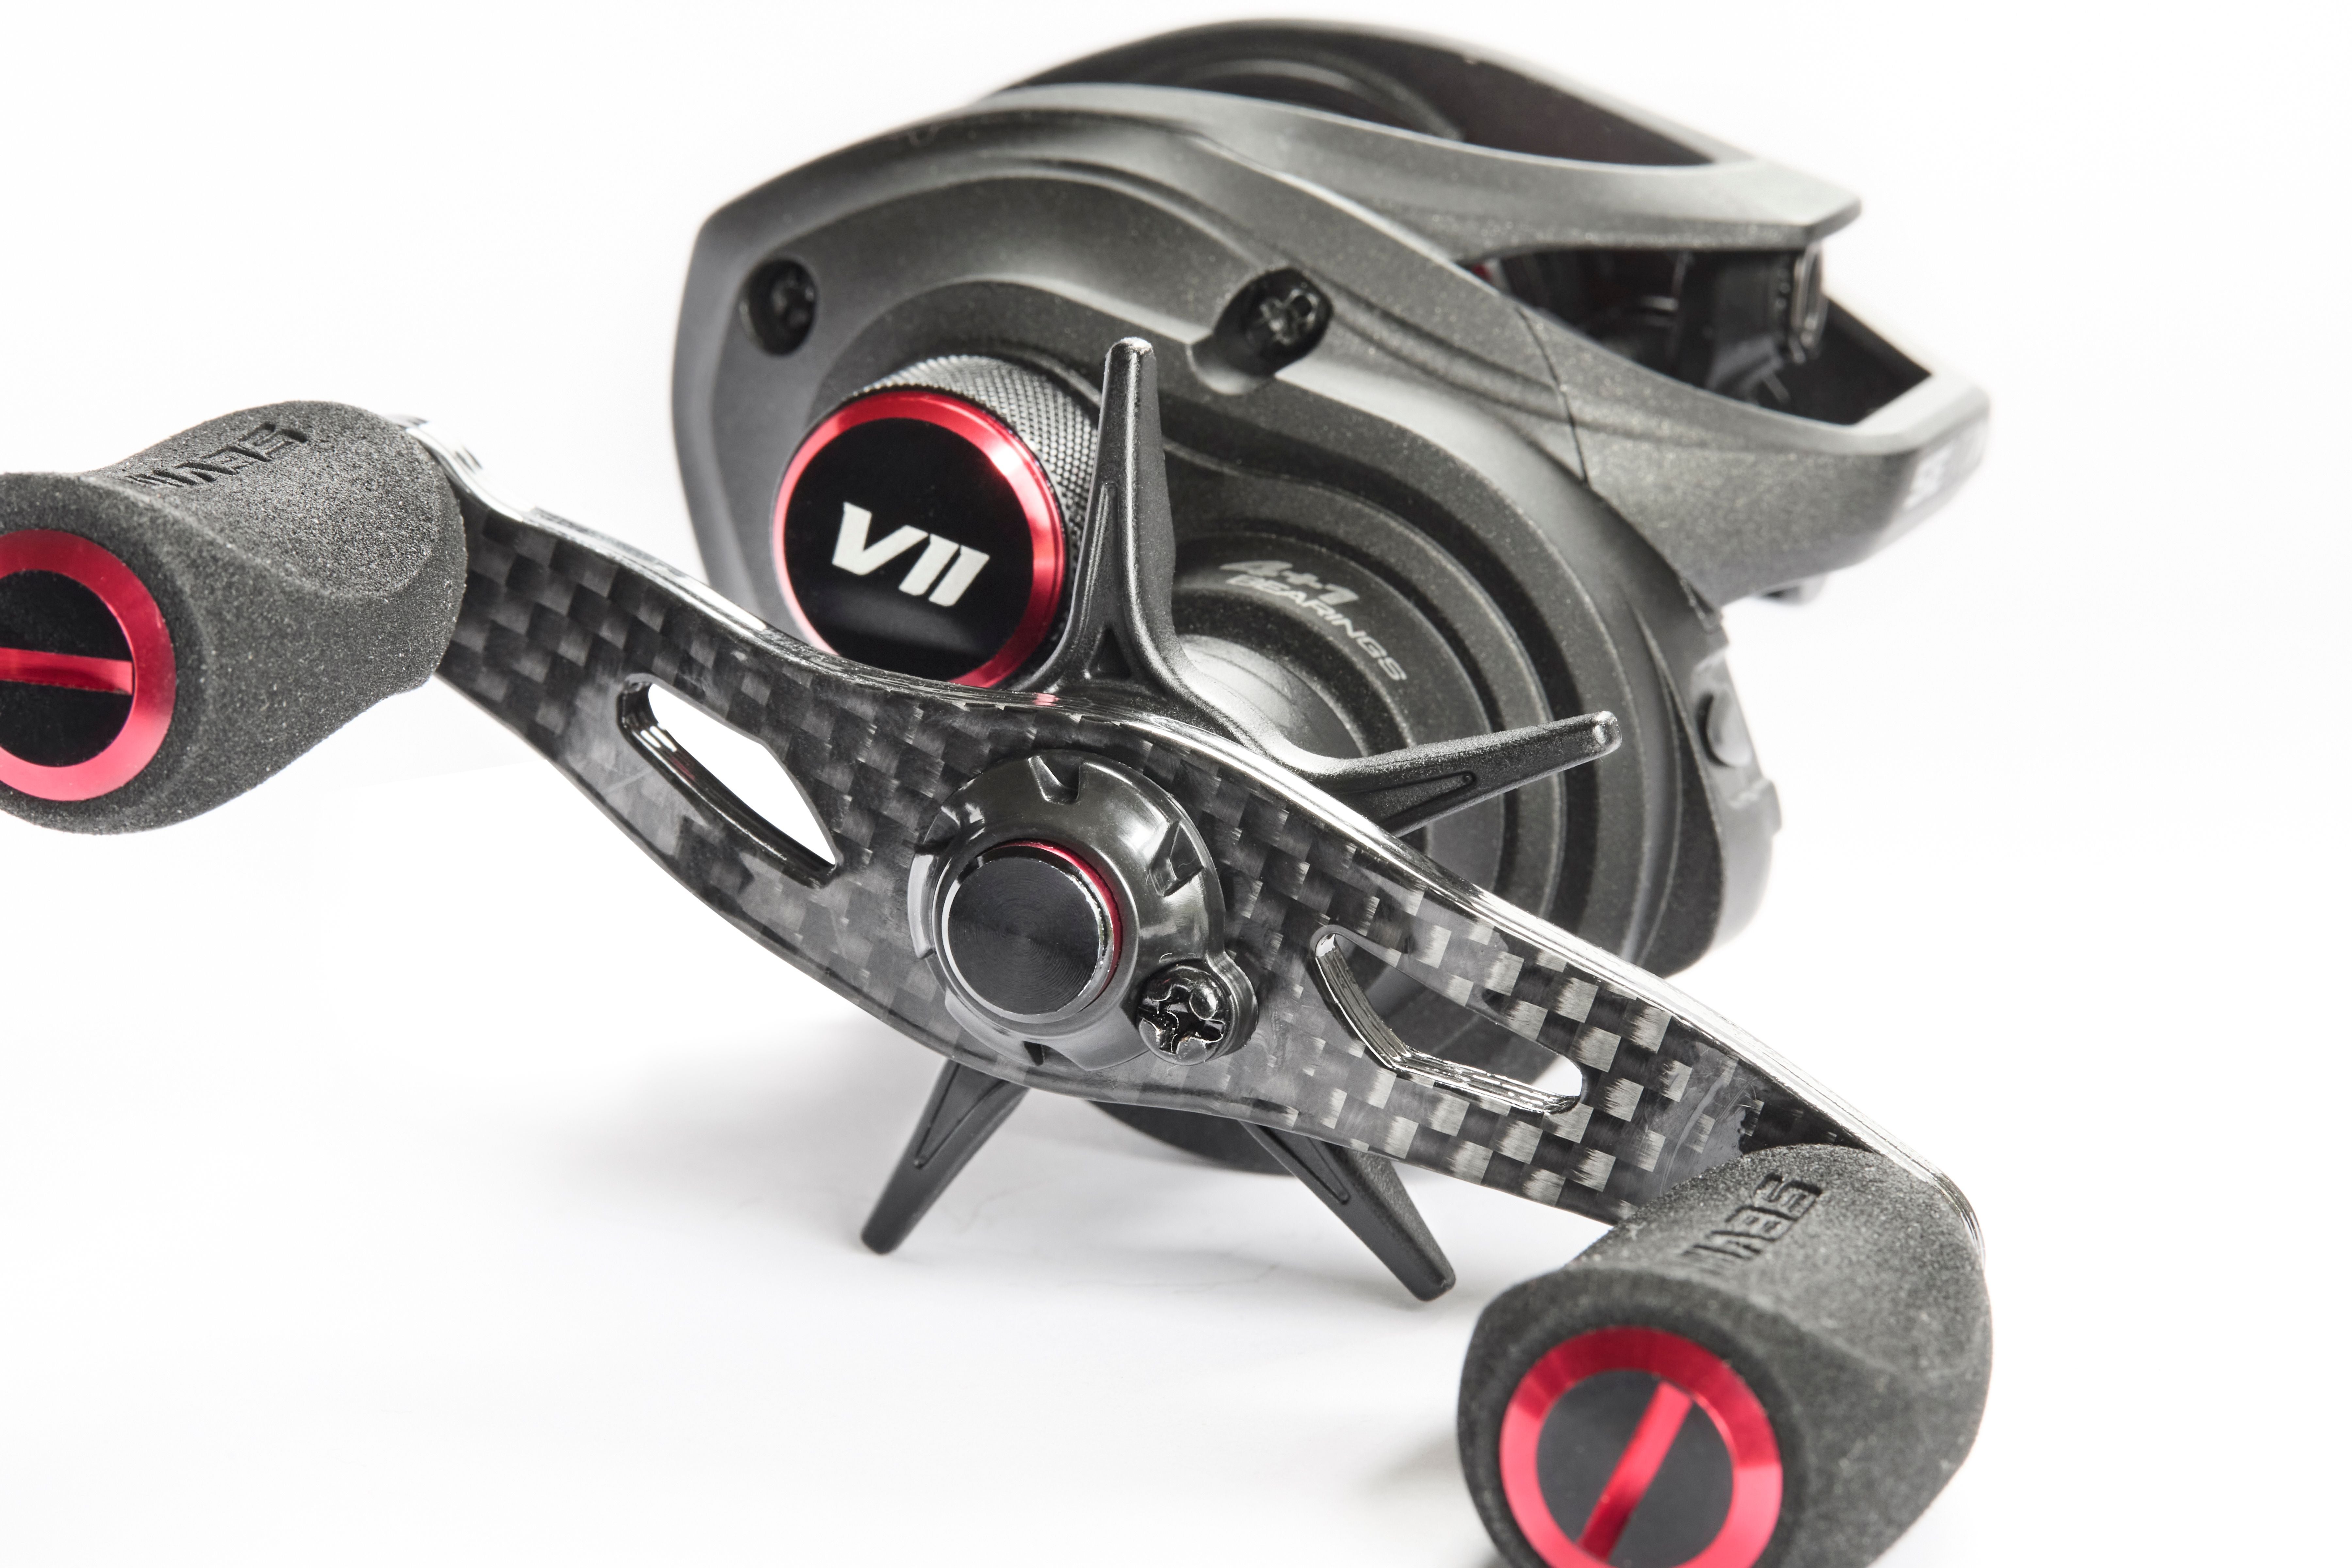 [ICAST] Introducing SEVIIN Reels from St. Croix